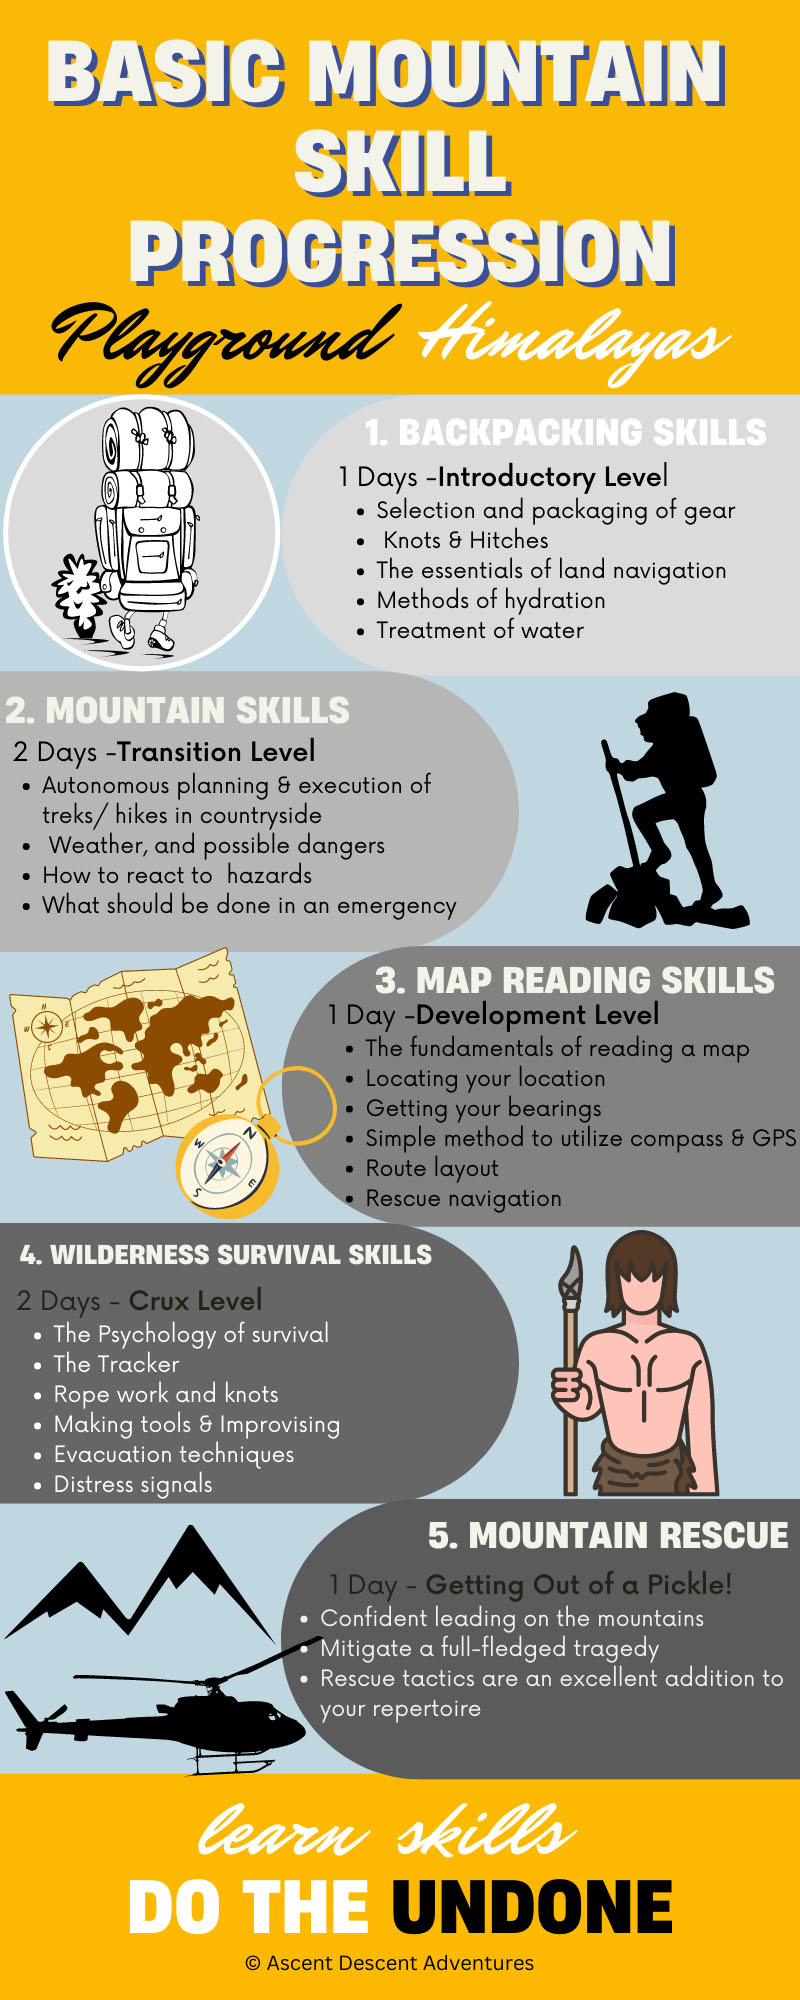 The infographic outlines basic mountain skill courses ranging from backpacking through mountain skills, map reading, survival skills, and eventually mountain rescue training